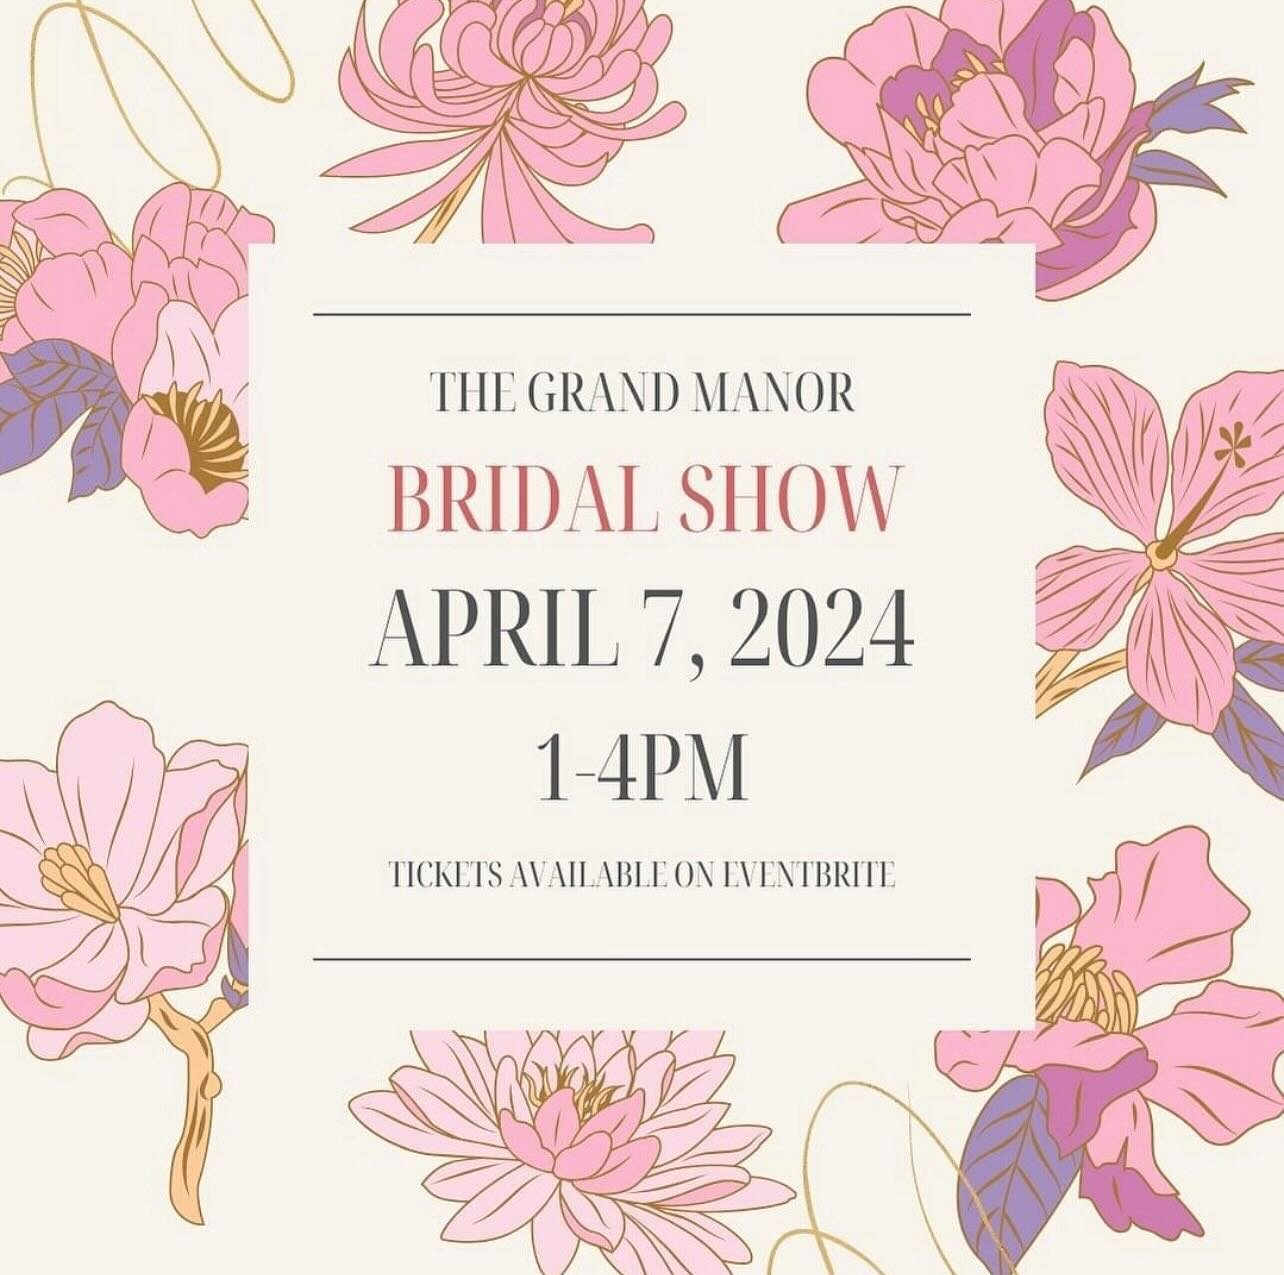 Looking forward to seeing everyone at the Bridal Show !! 🤩🎉